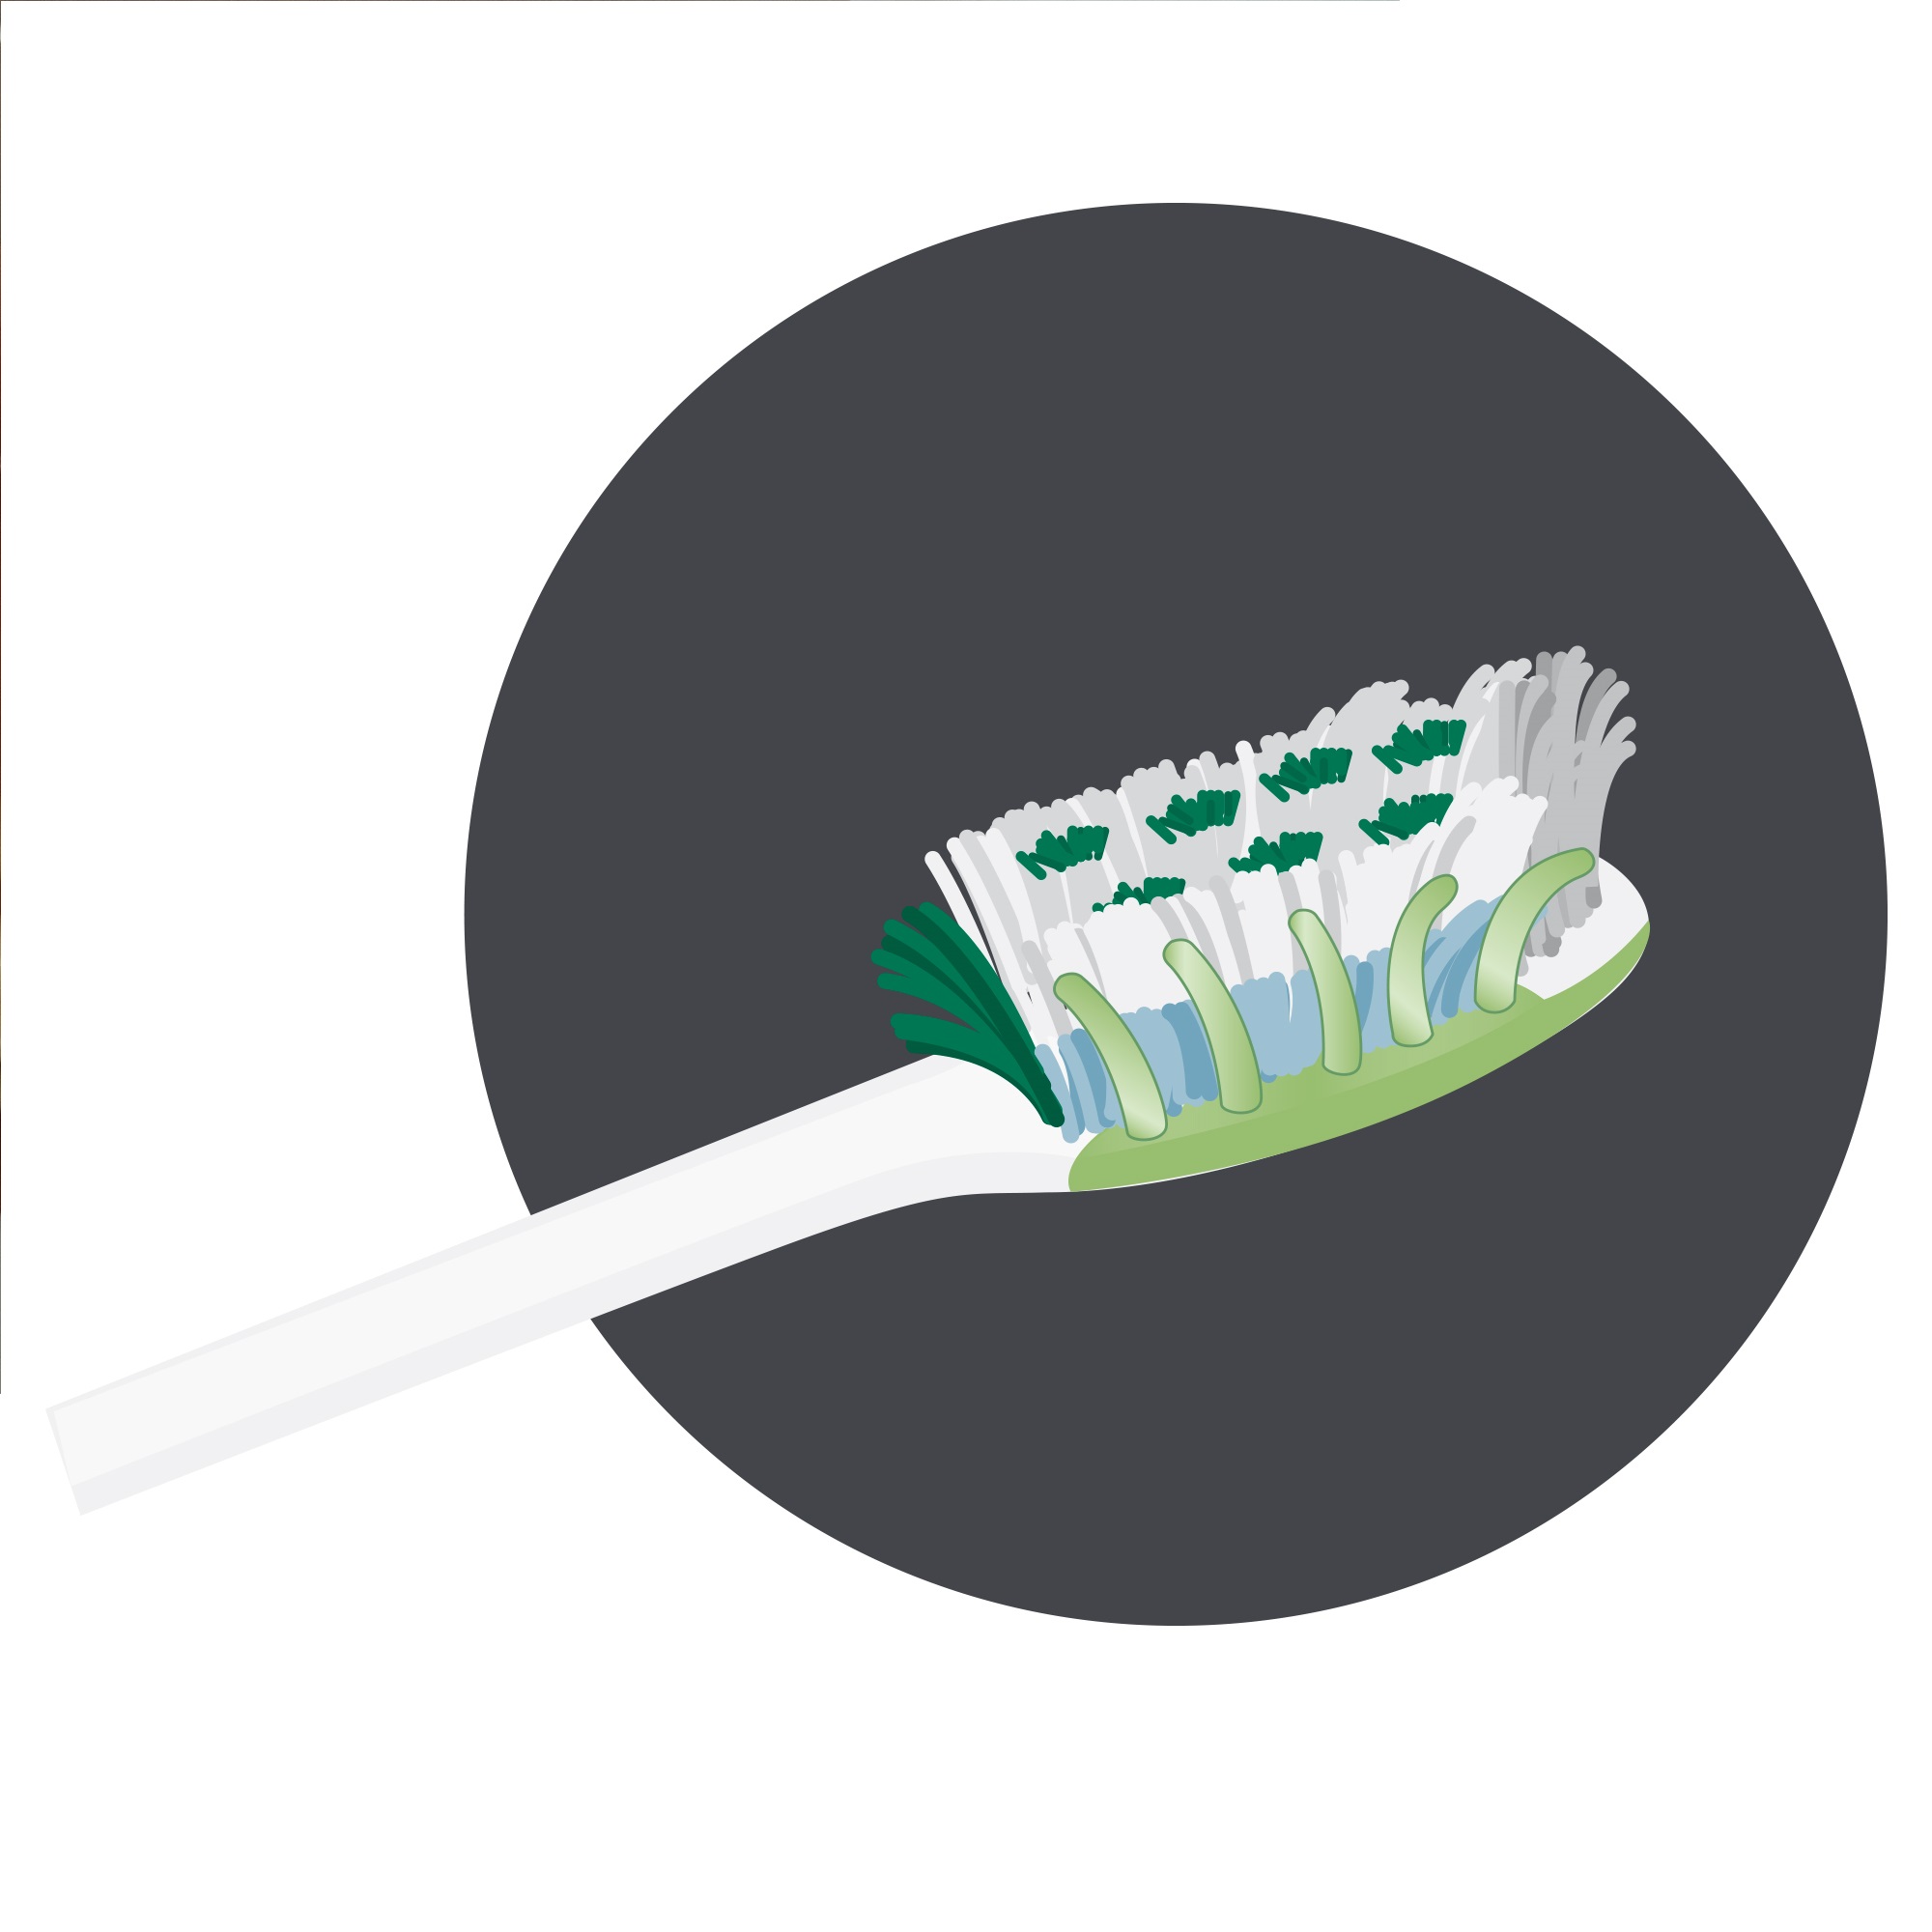 Brushes should have rounded bristles to care for gums.